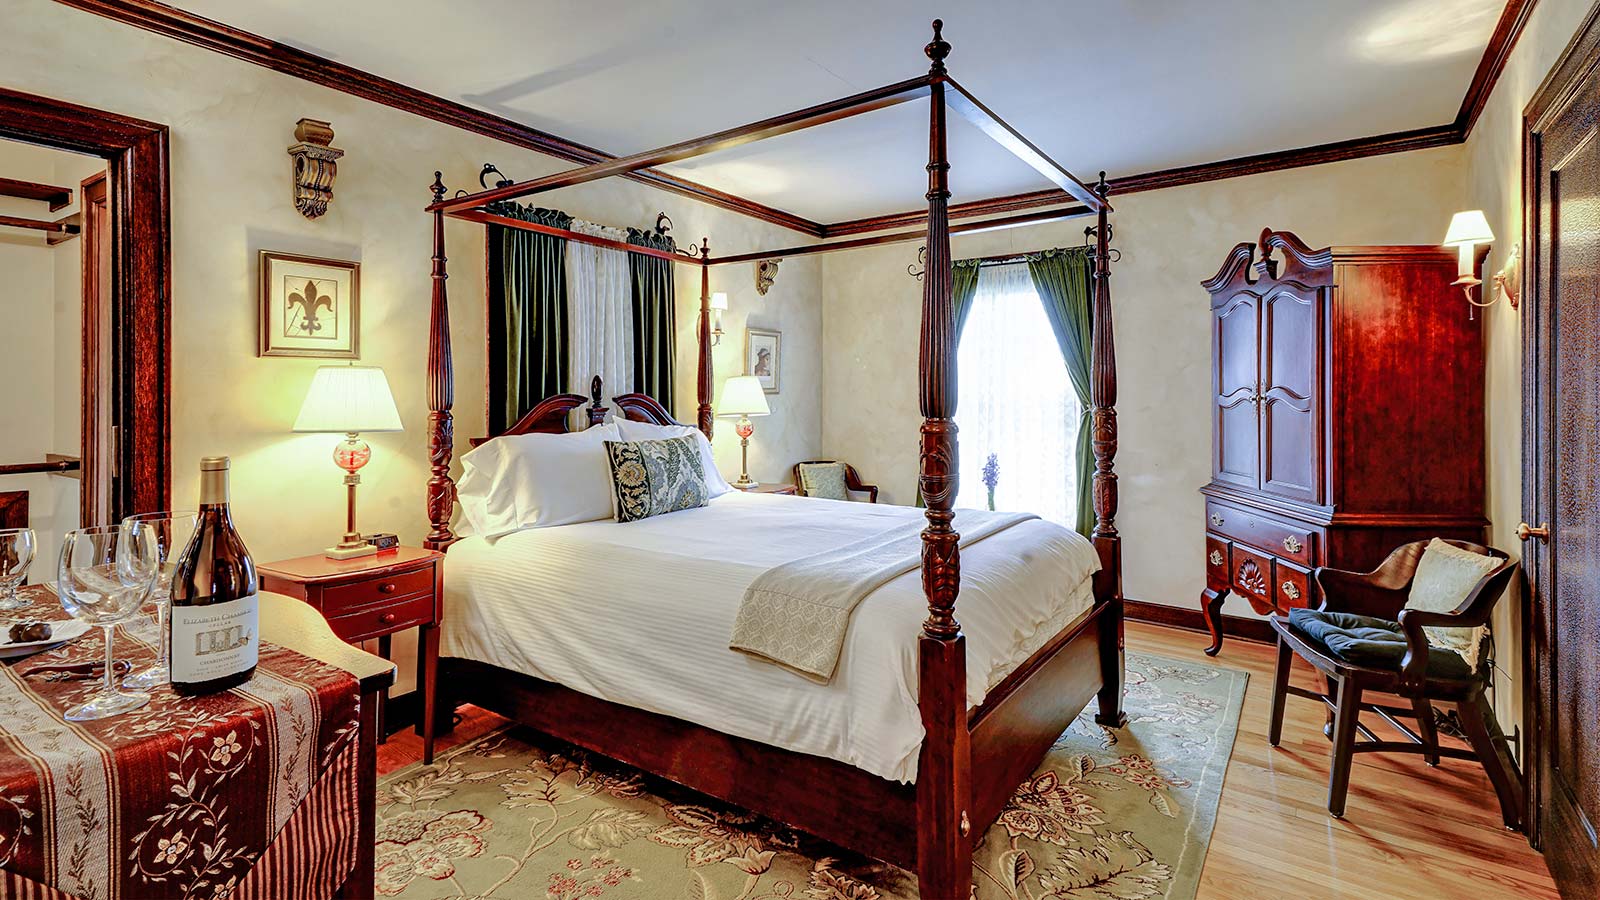 unwind in this gorgeous guest room at our Bed and Breakfast, just a short walk away from downtown McMinnville